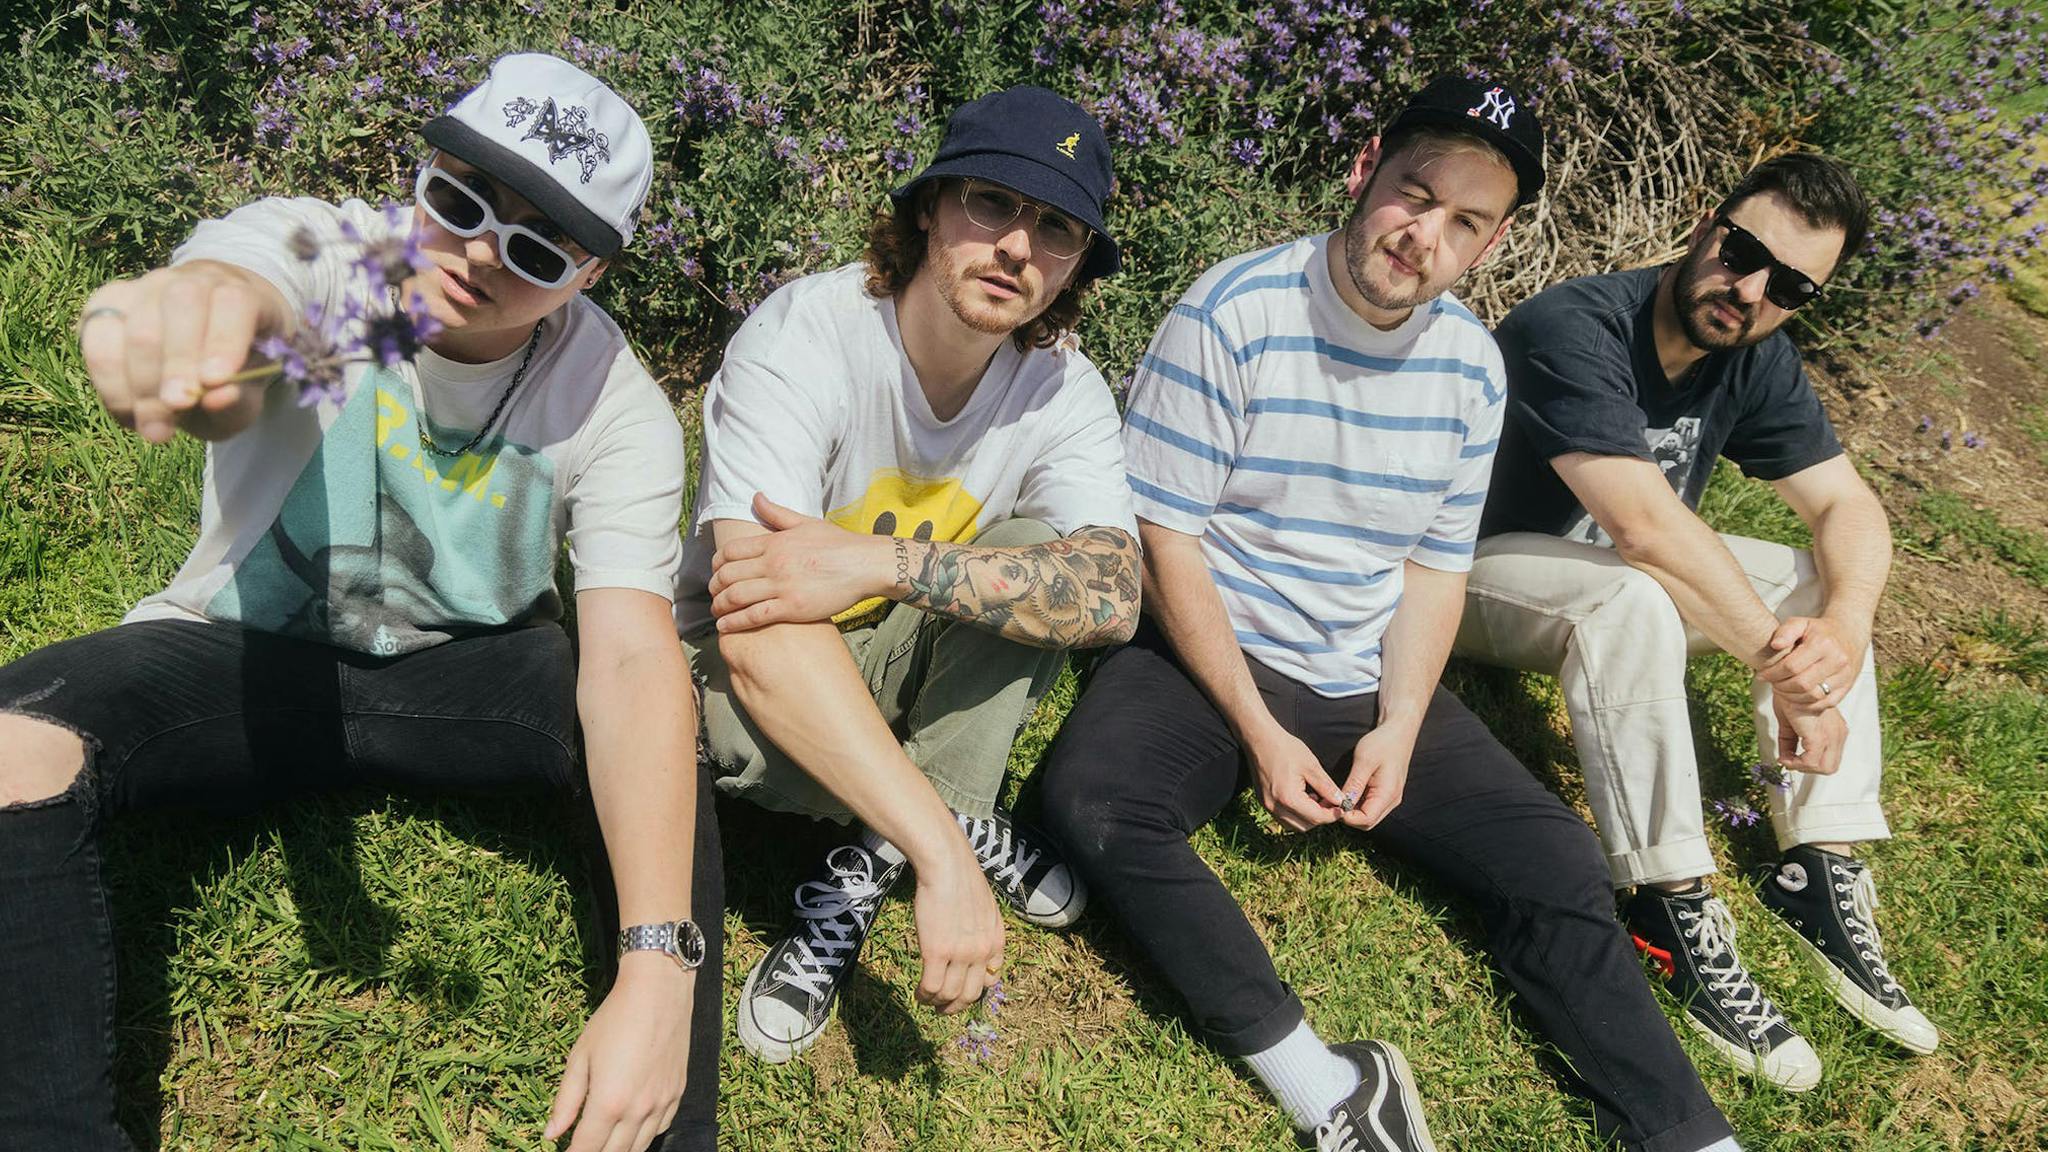 Listen: State Champs have covered What’s My Age Again? by blink-182